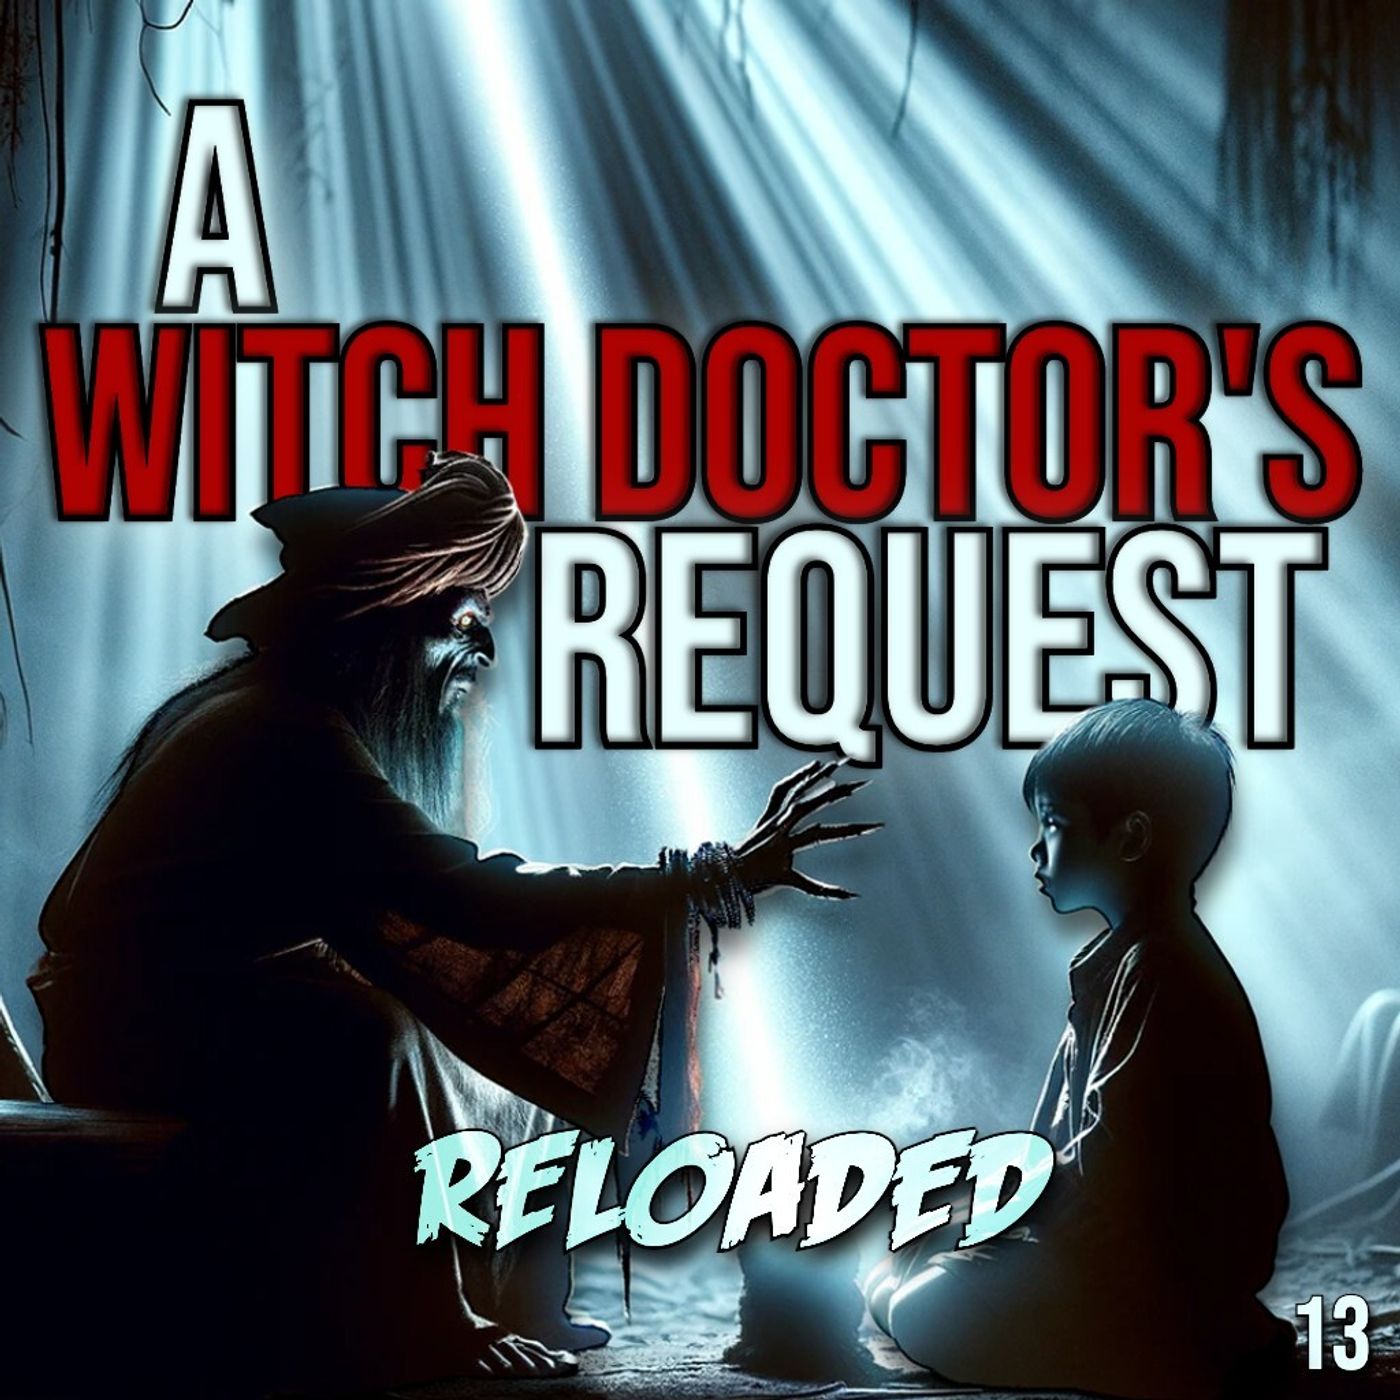 RELOADED | 13: A Witch Doctor’s Request